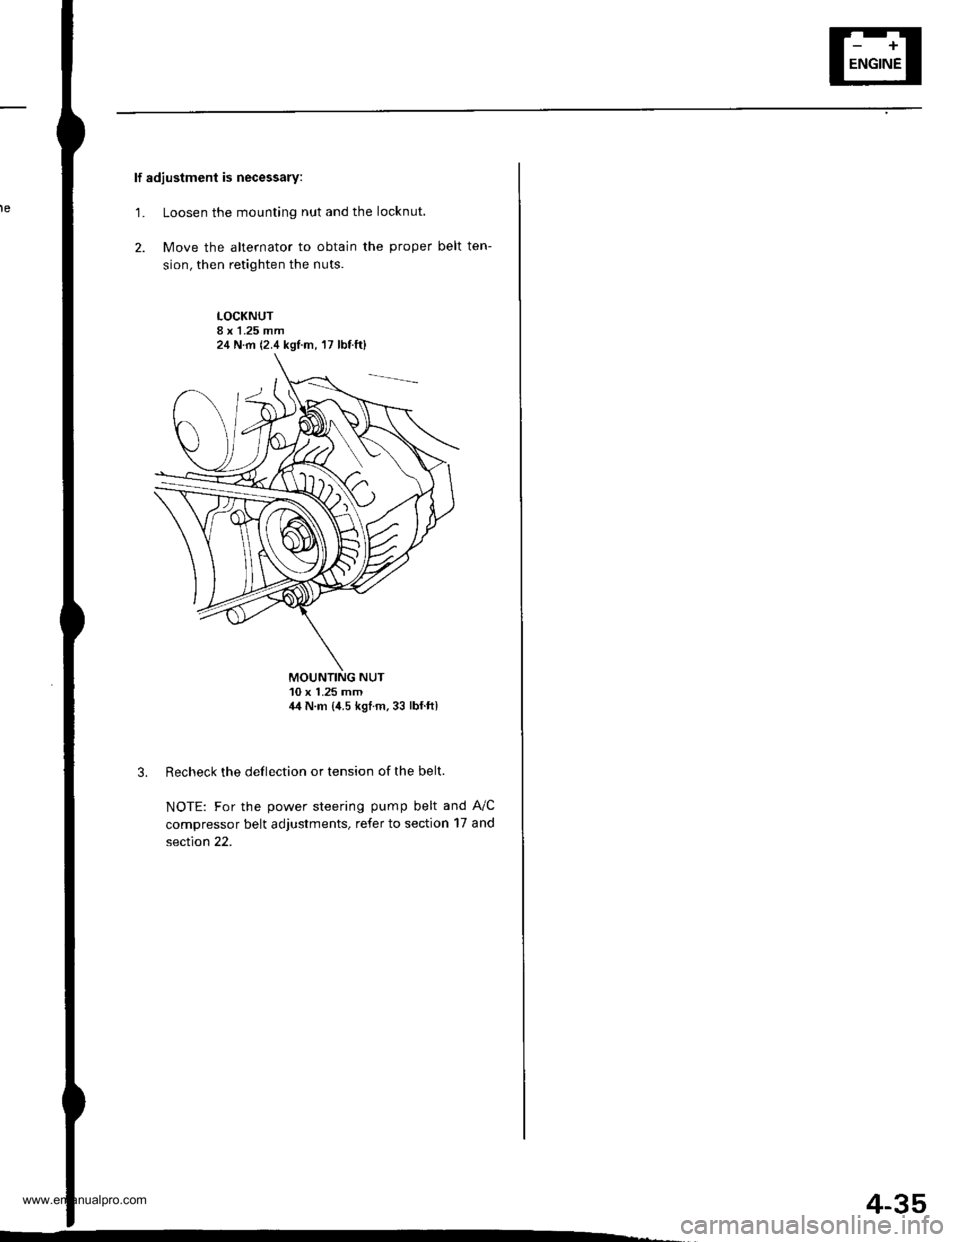 HONDA CR-V 1998 RD1-RD3 / 1.G Workshop Manual 
lf adjustment is necessary:
1. Loosen the mounting nut and the locknut.
2. Move the alternator to obtain the proper belt ten-
sion, then retighten the nuts.
LOCKNUT8 x 1.25 mm
MOUNTING NUT10 x 1.25 m